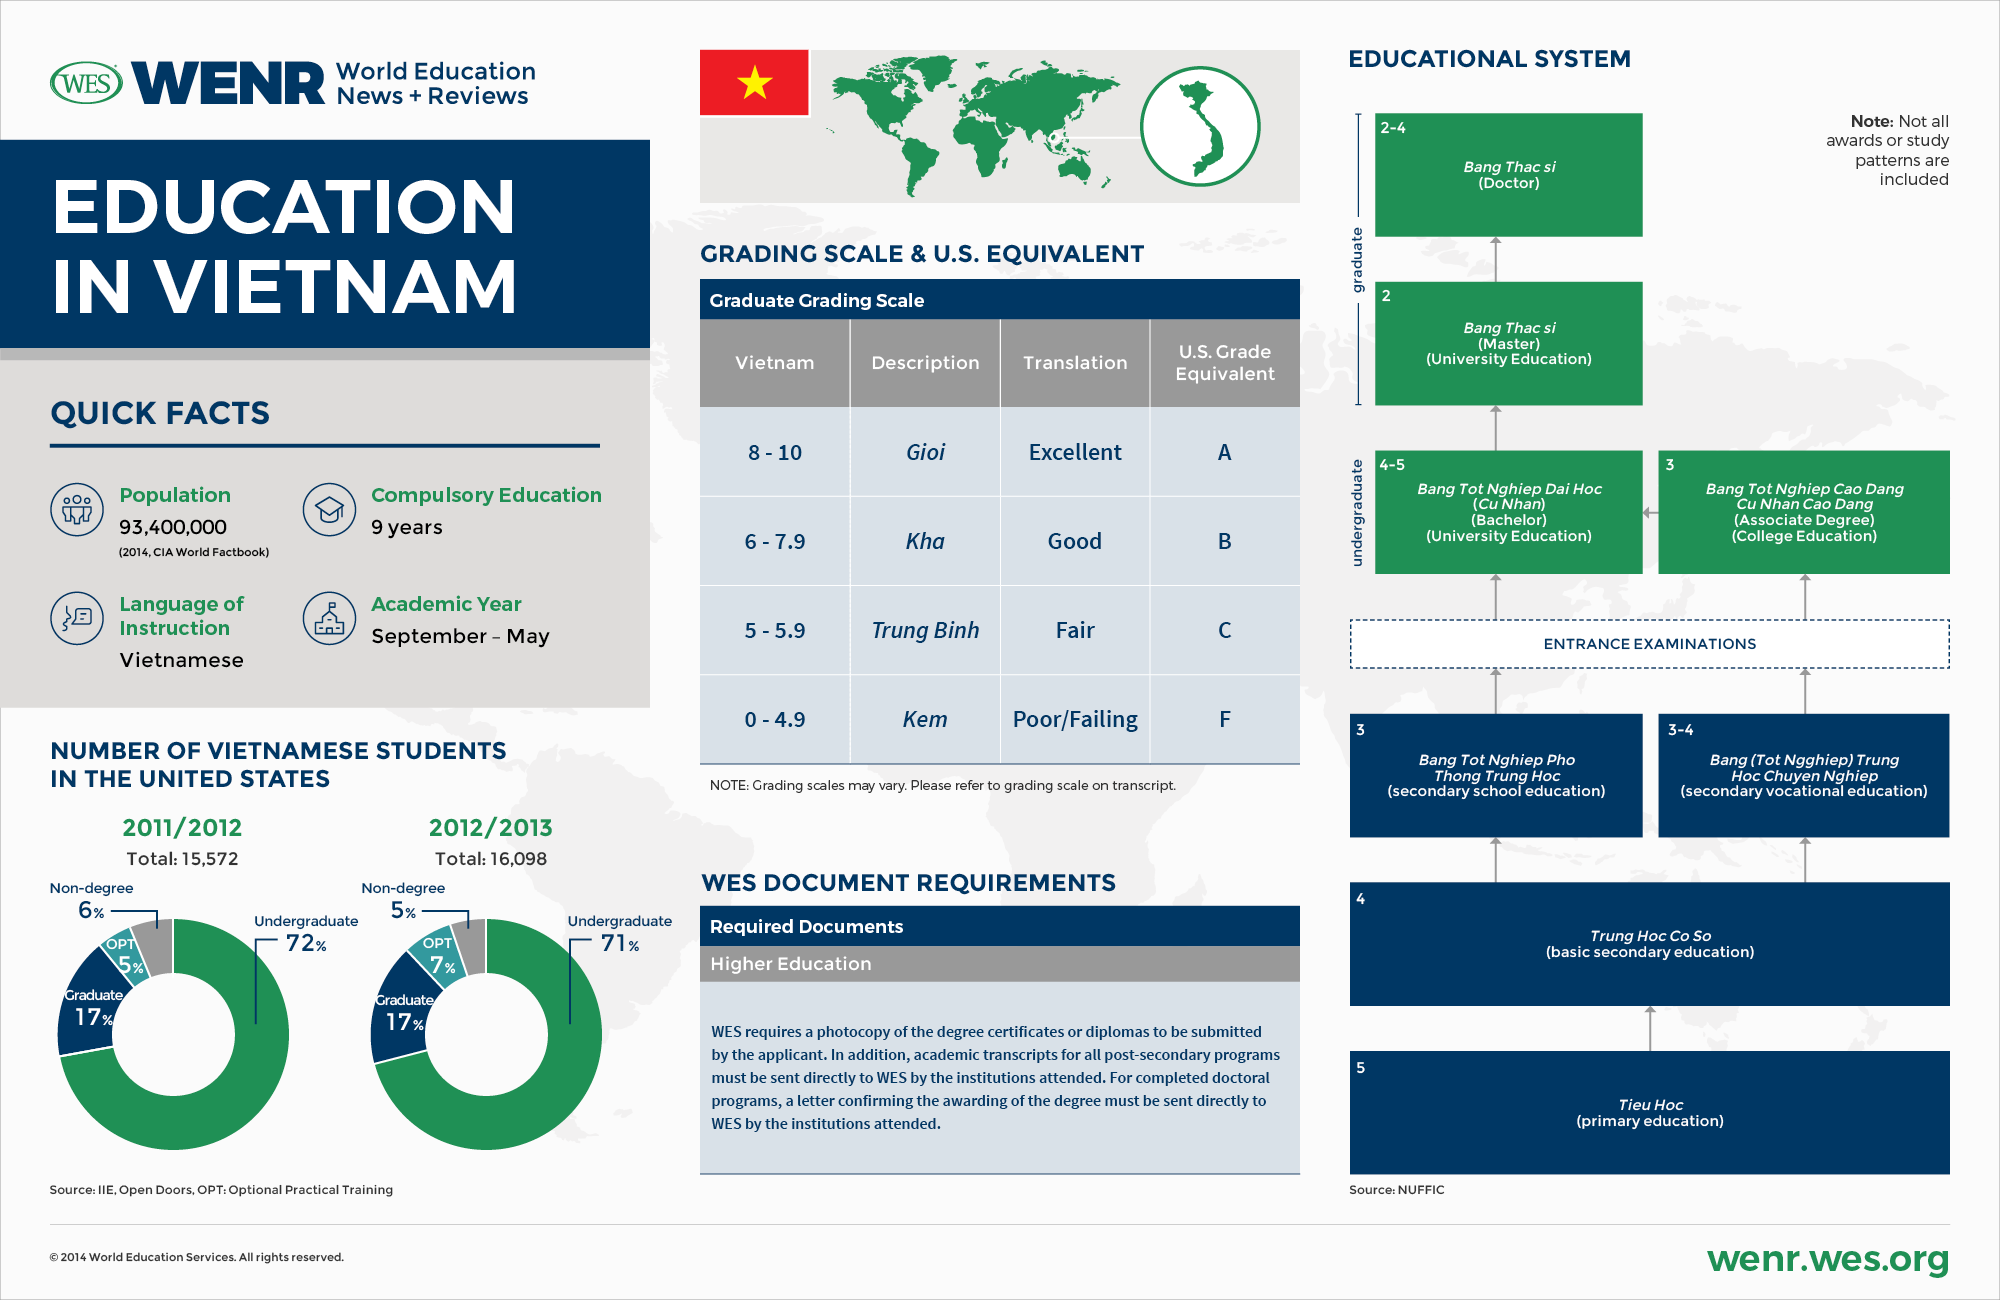 An infographic with fast facts about Vietnam's educational system and international student mobility landscape. 